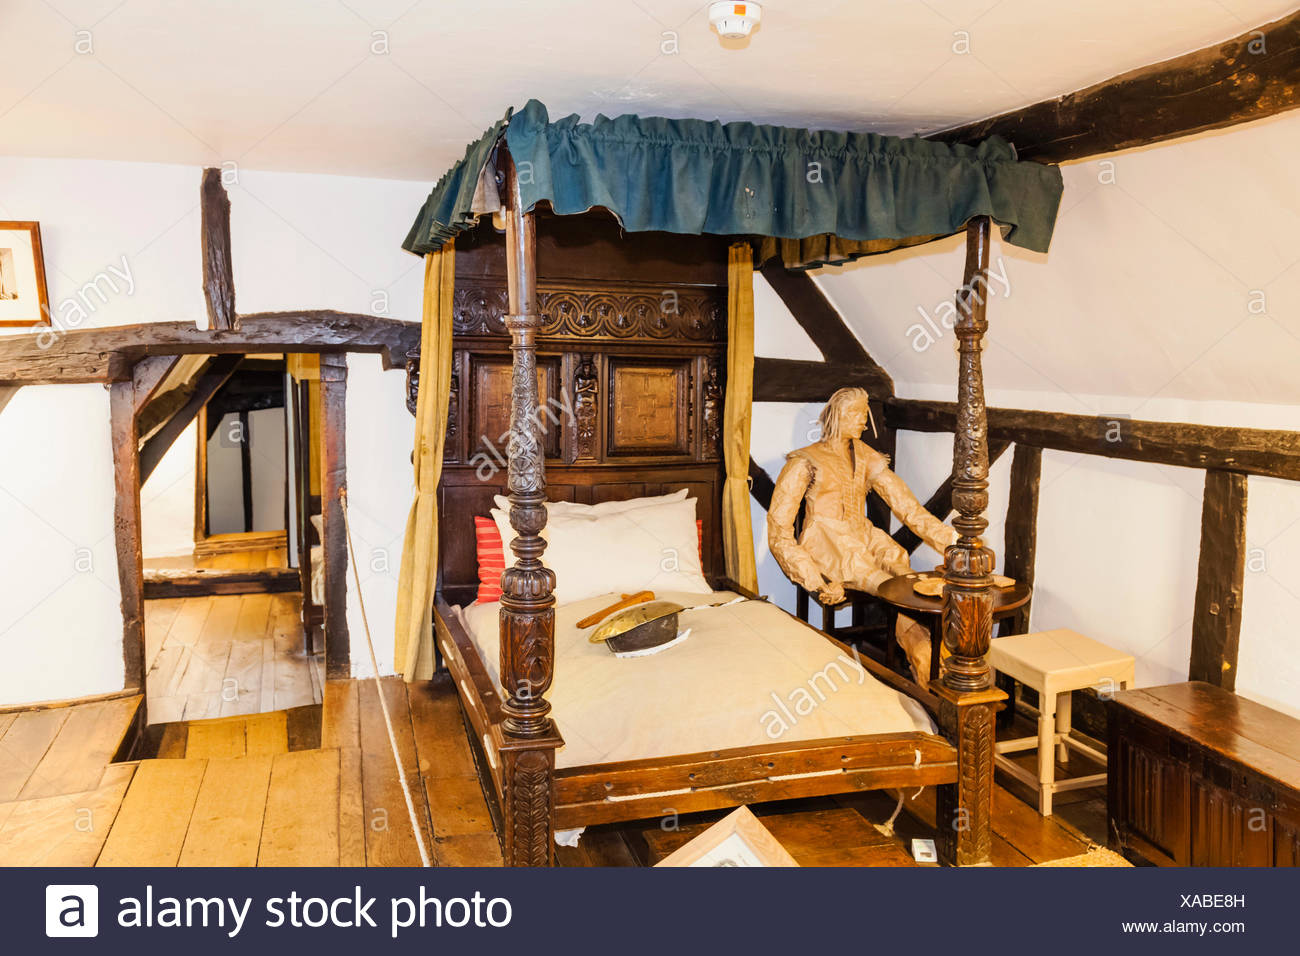 Anne Hathaways Cottage Interior High Resolution Stock Photography And Images Alamy